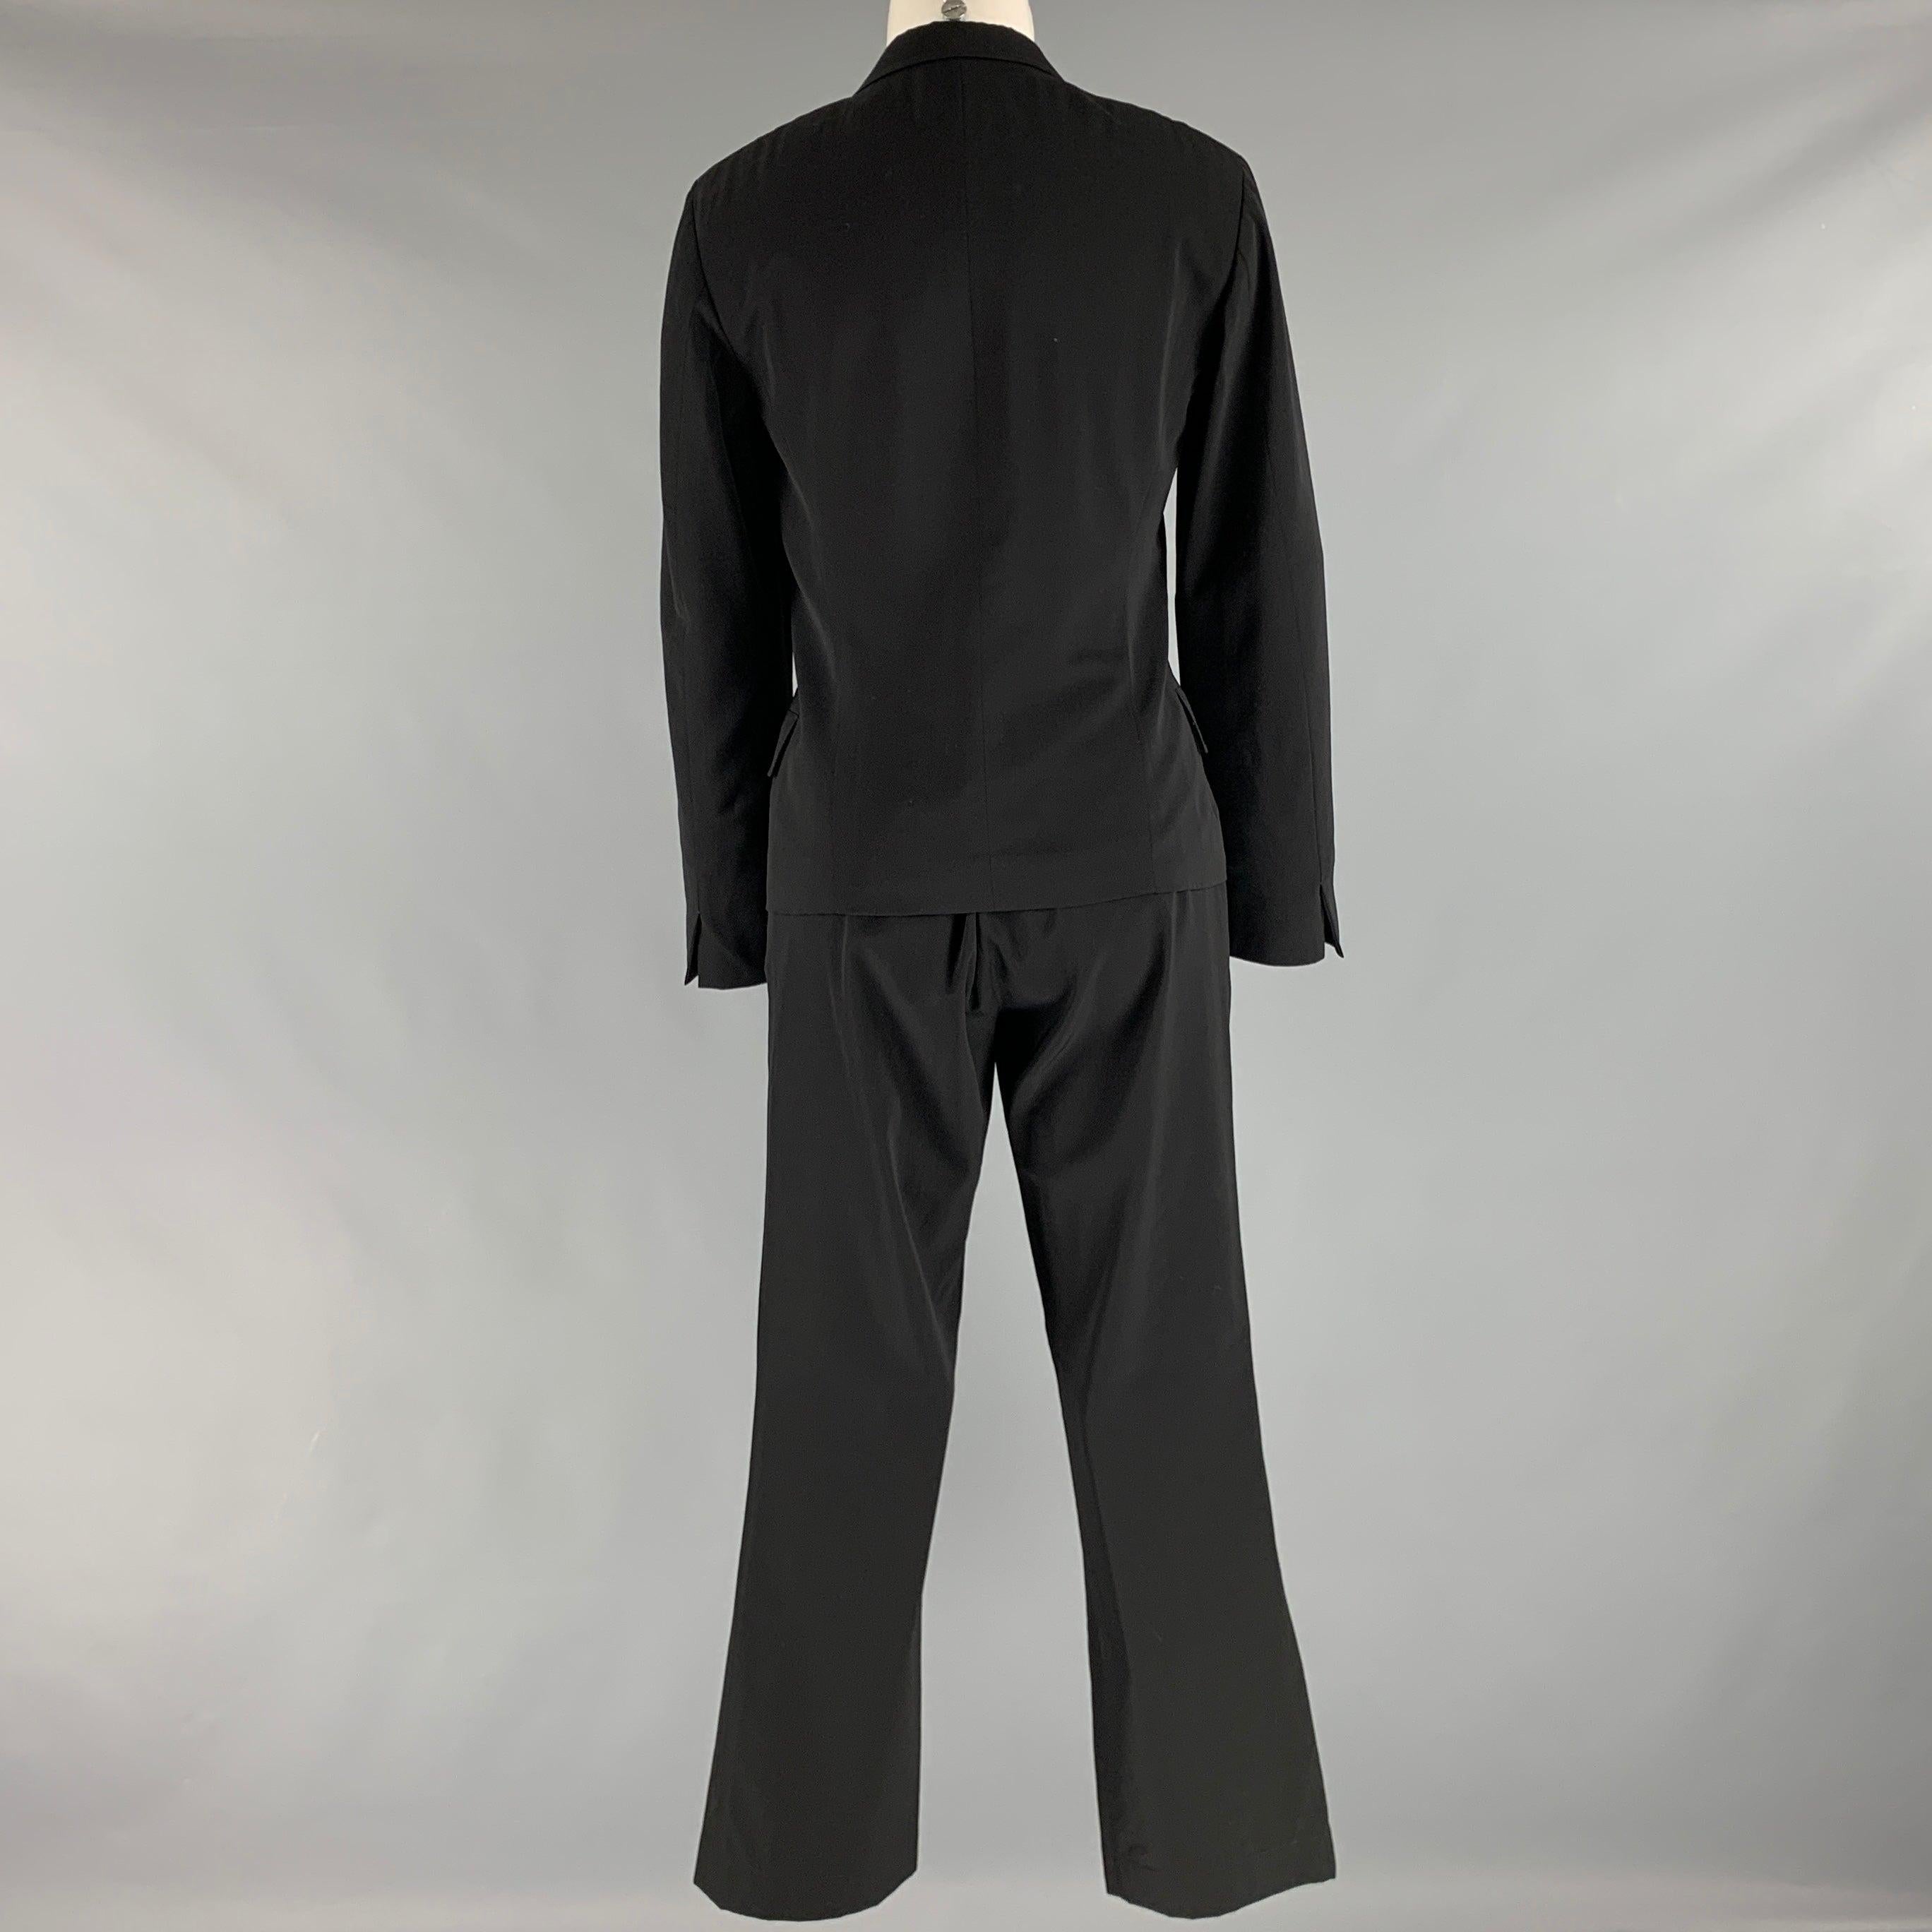 JIL SANDER Size 6 Black Silk Single Breasted Pants Suit In Excellent Condition For Sale In San Francisco, CA